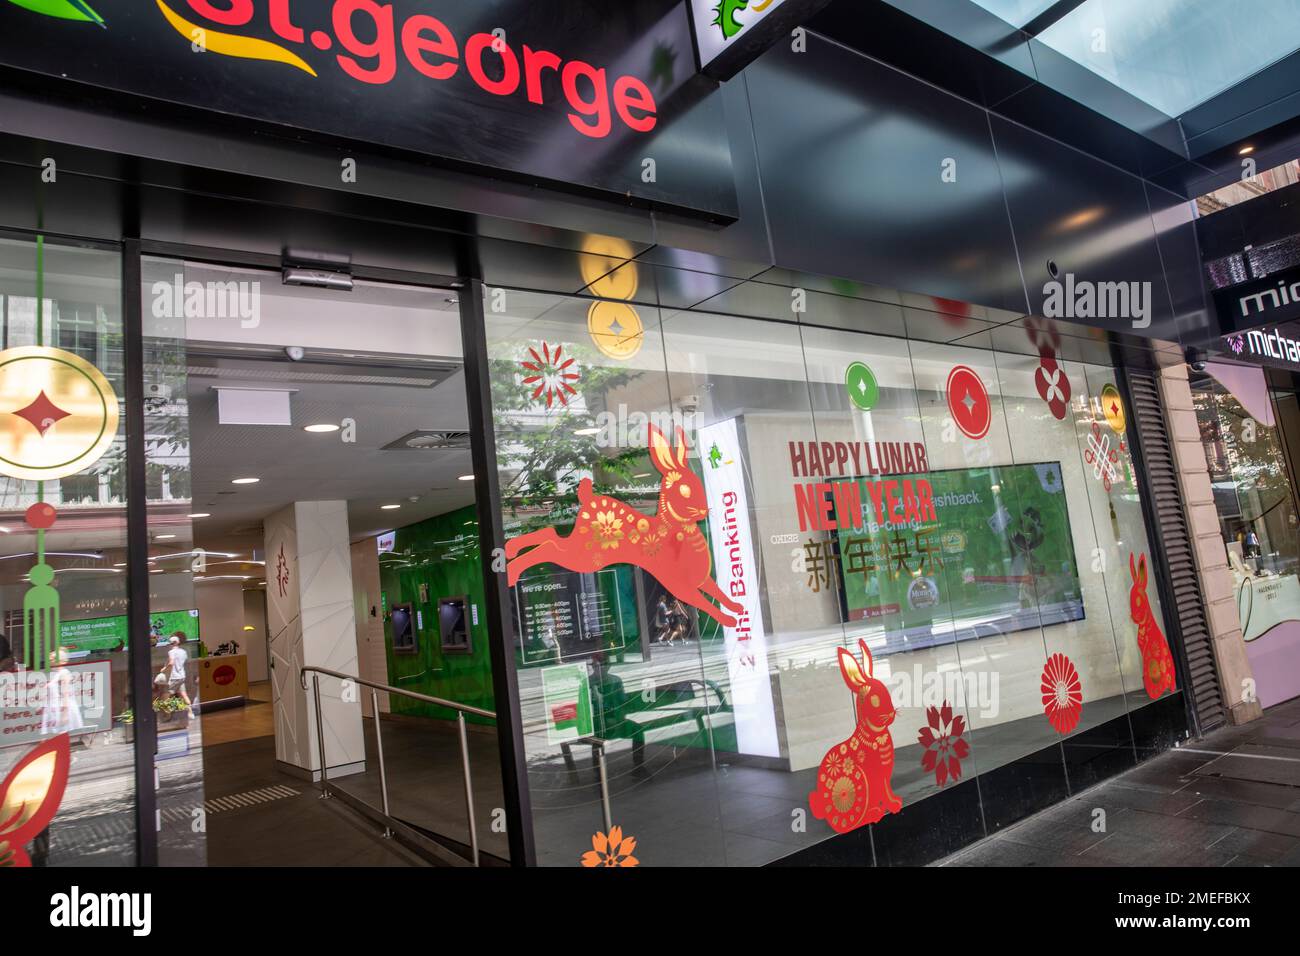 St George Bank branch in Sydney city centre celebrates lunar Chinese New Year year of the rabbit,Sydney,NSW,Australia Stock Photo